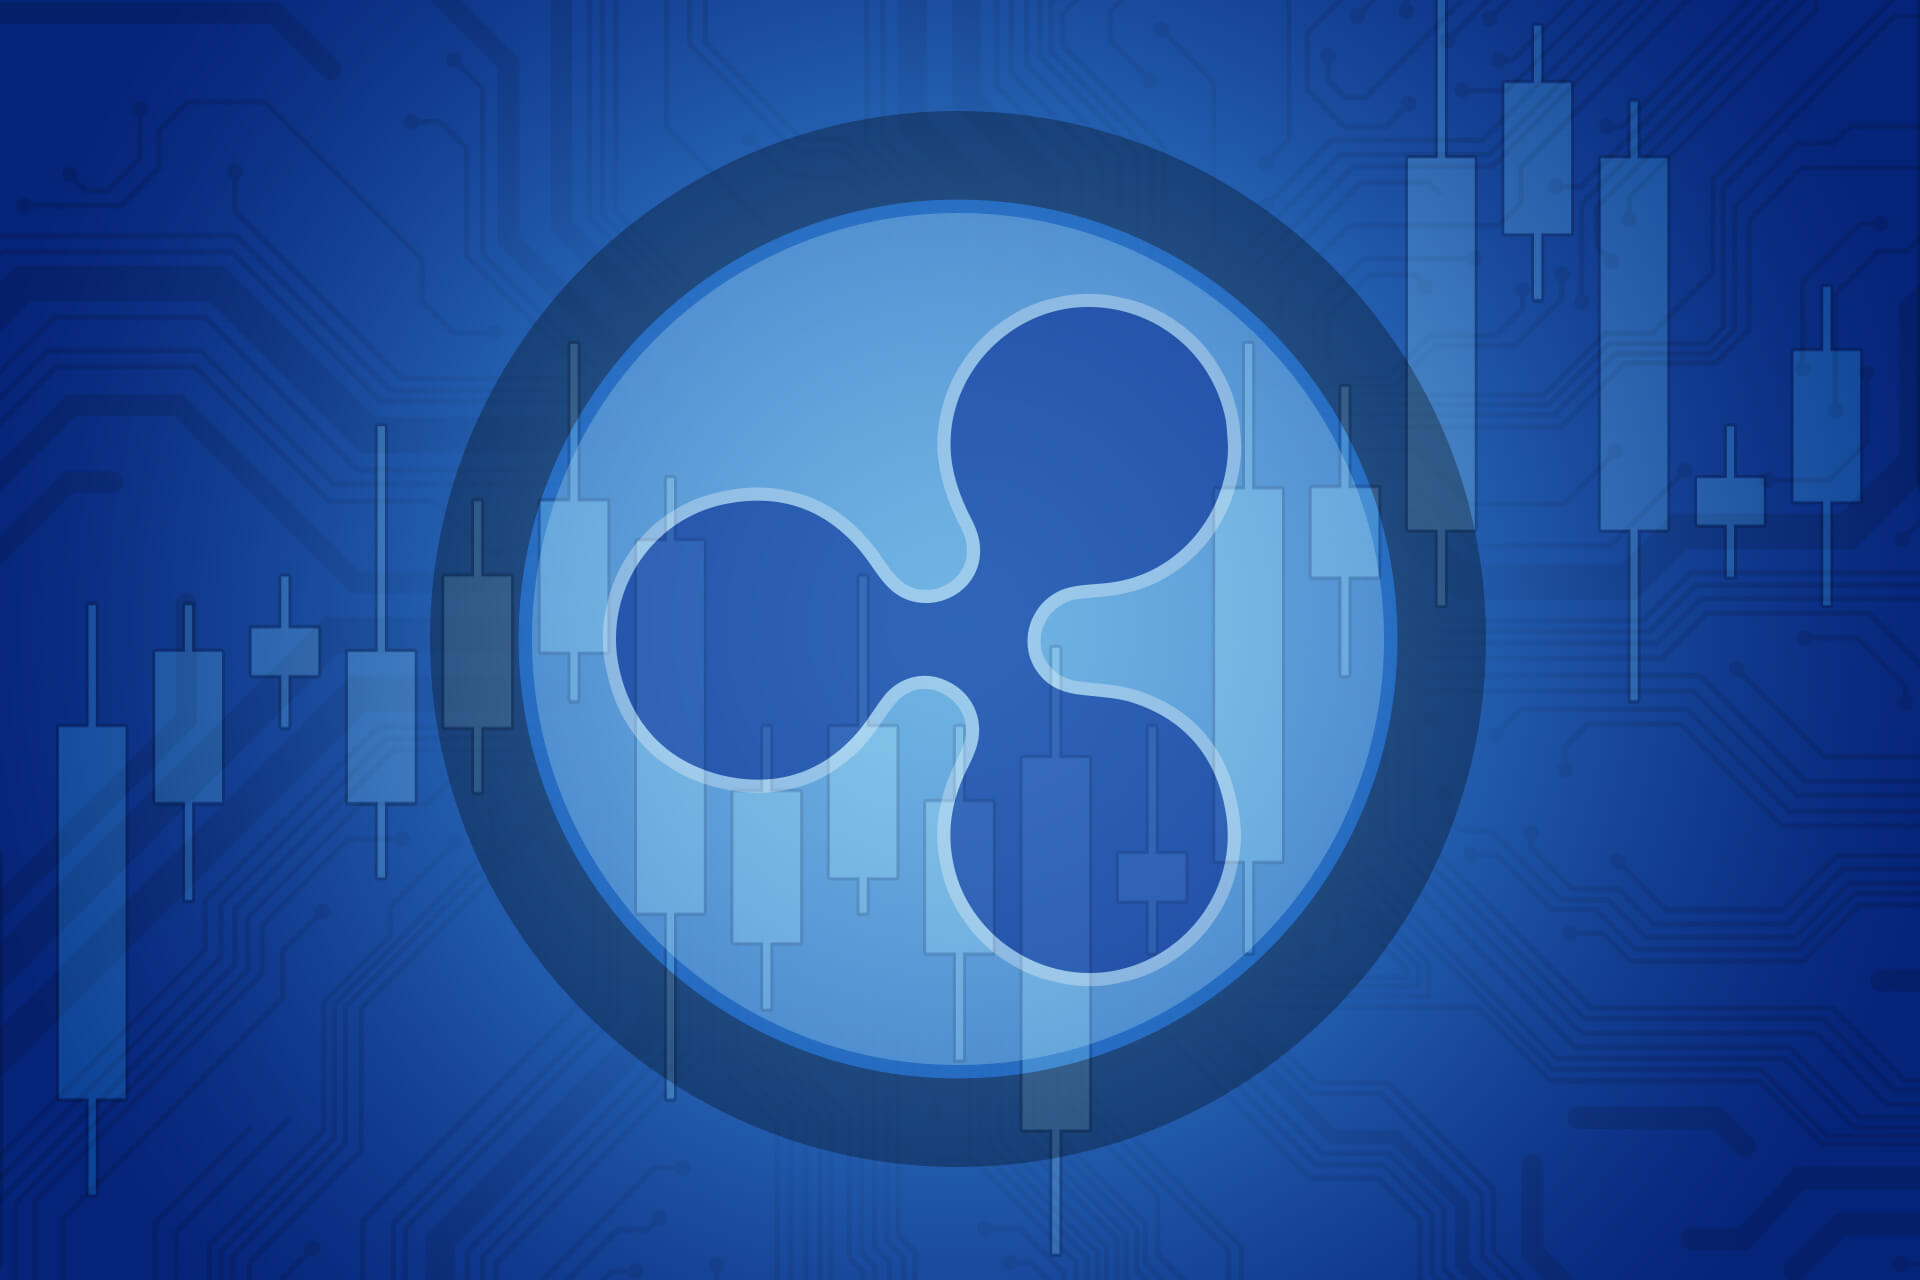 Ripple XRP cryptocurrency image free image download